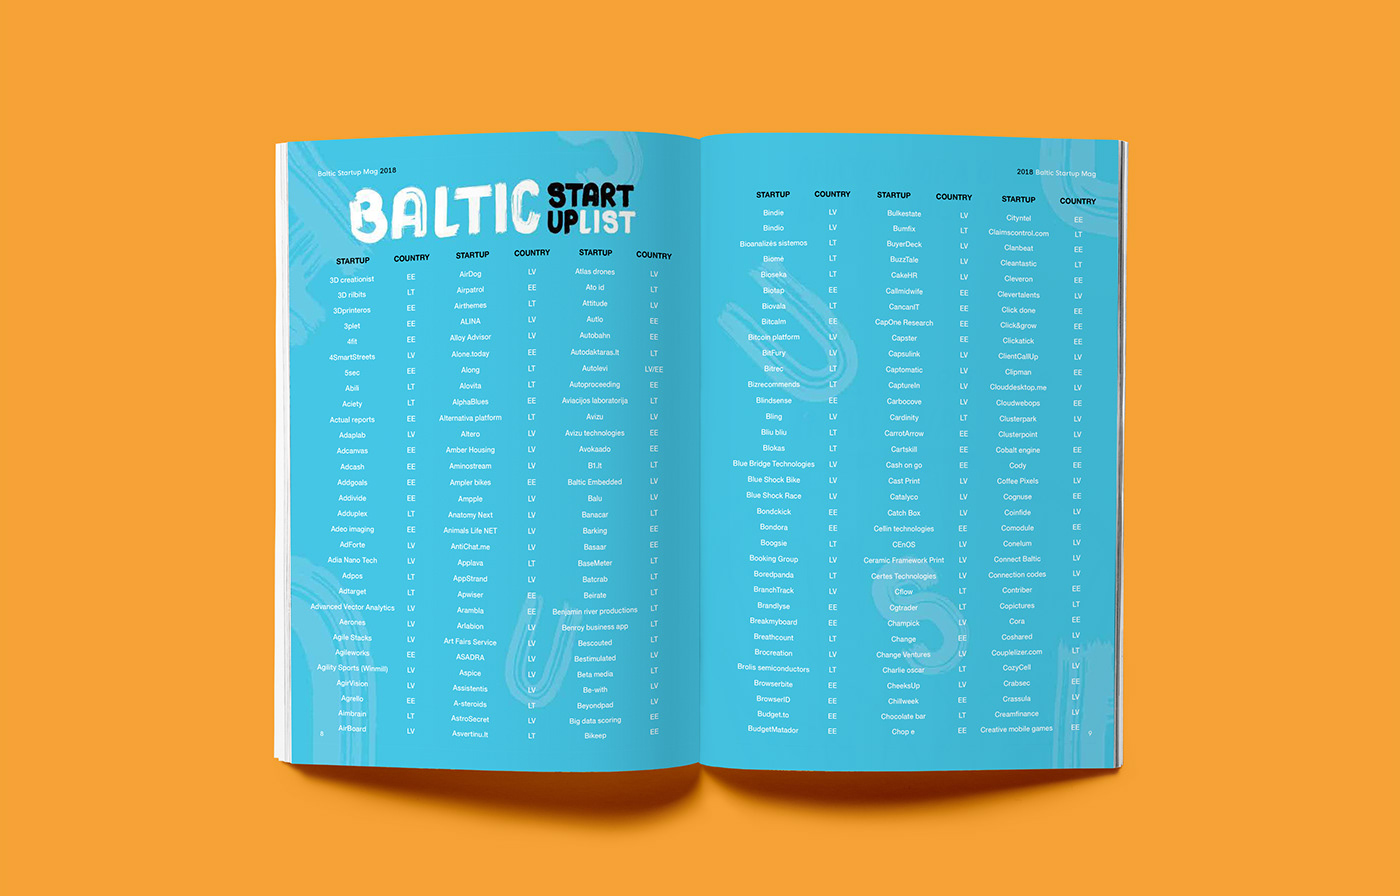 design Calligraphy   magazine lettering graphic design  Startup Baltic Layout